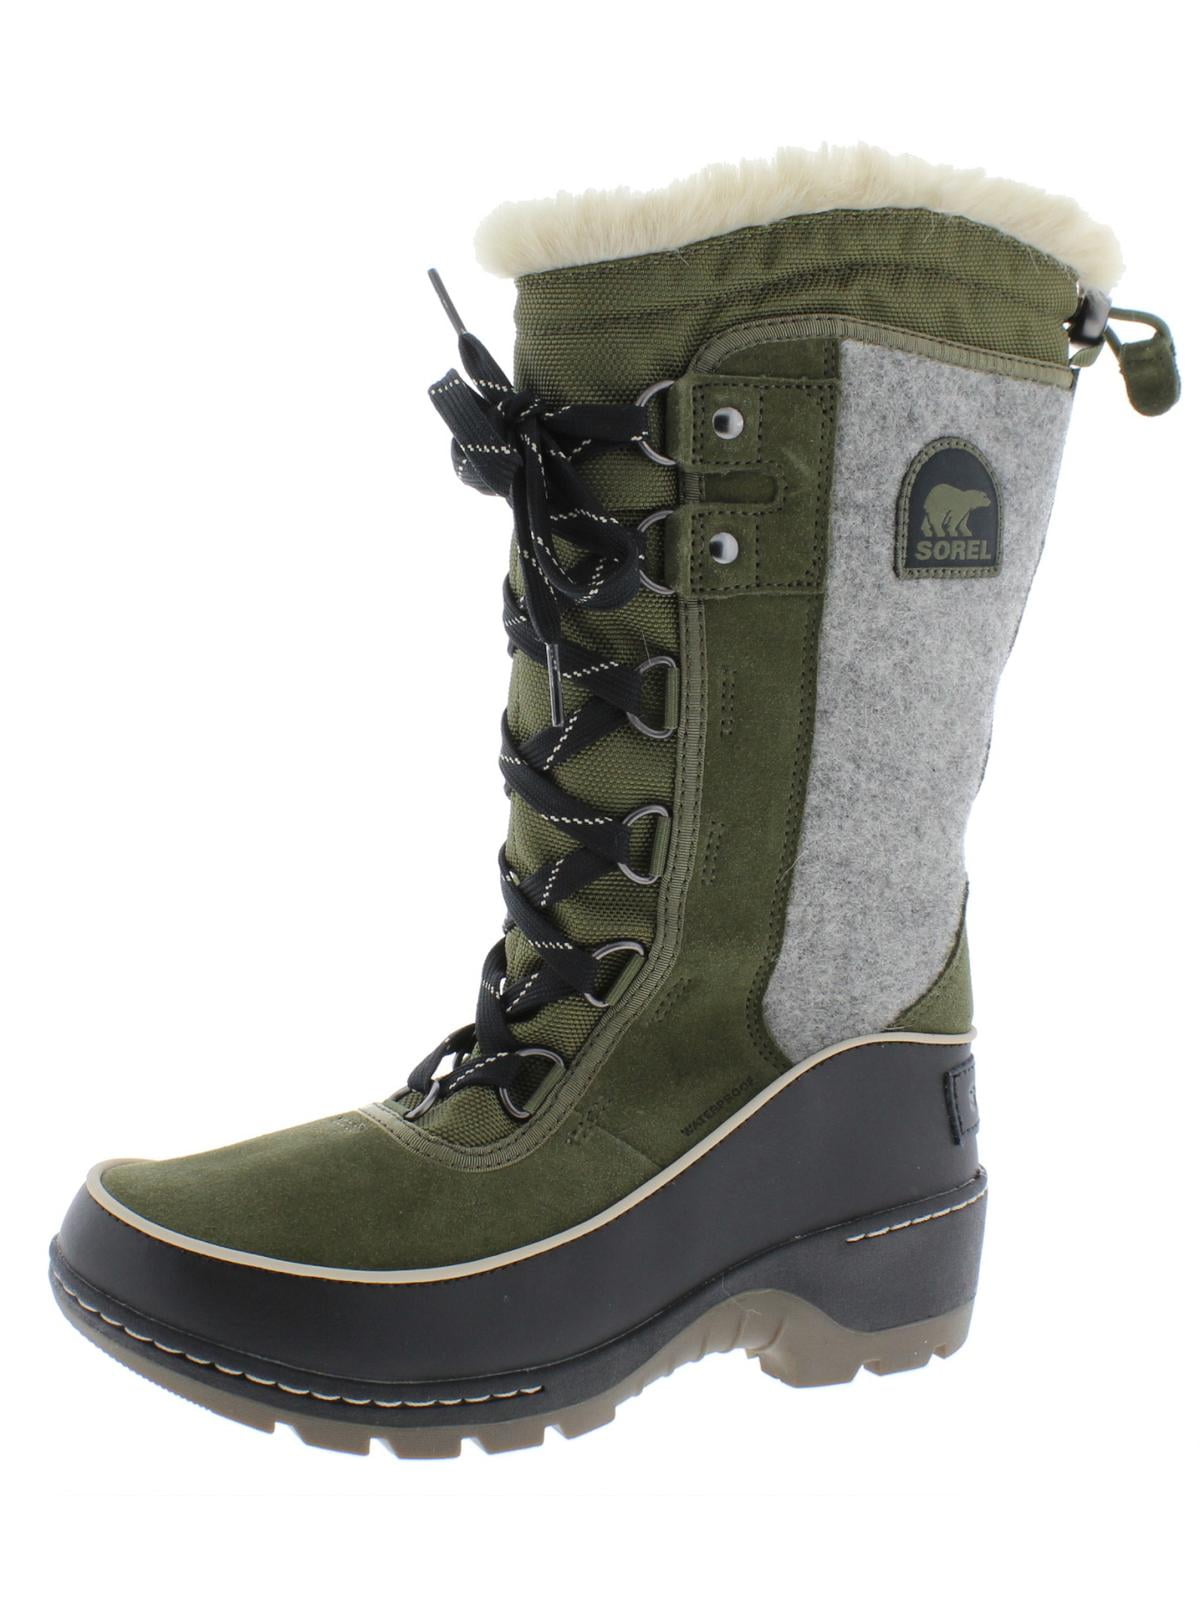 Details about   Sorel Women's Tivoli III High Various Sizes and Colors